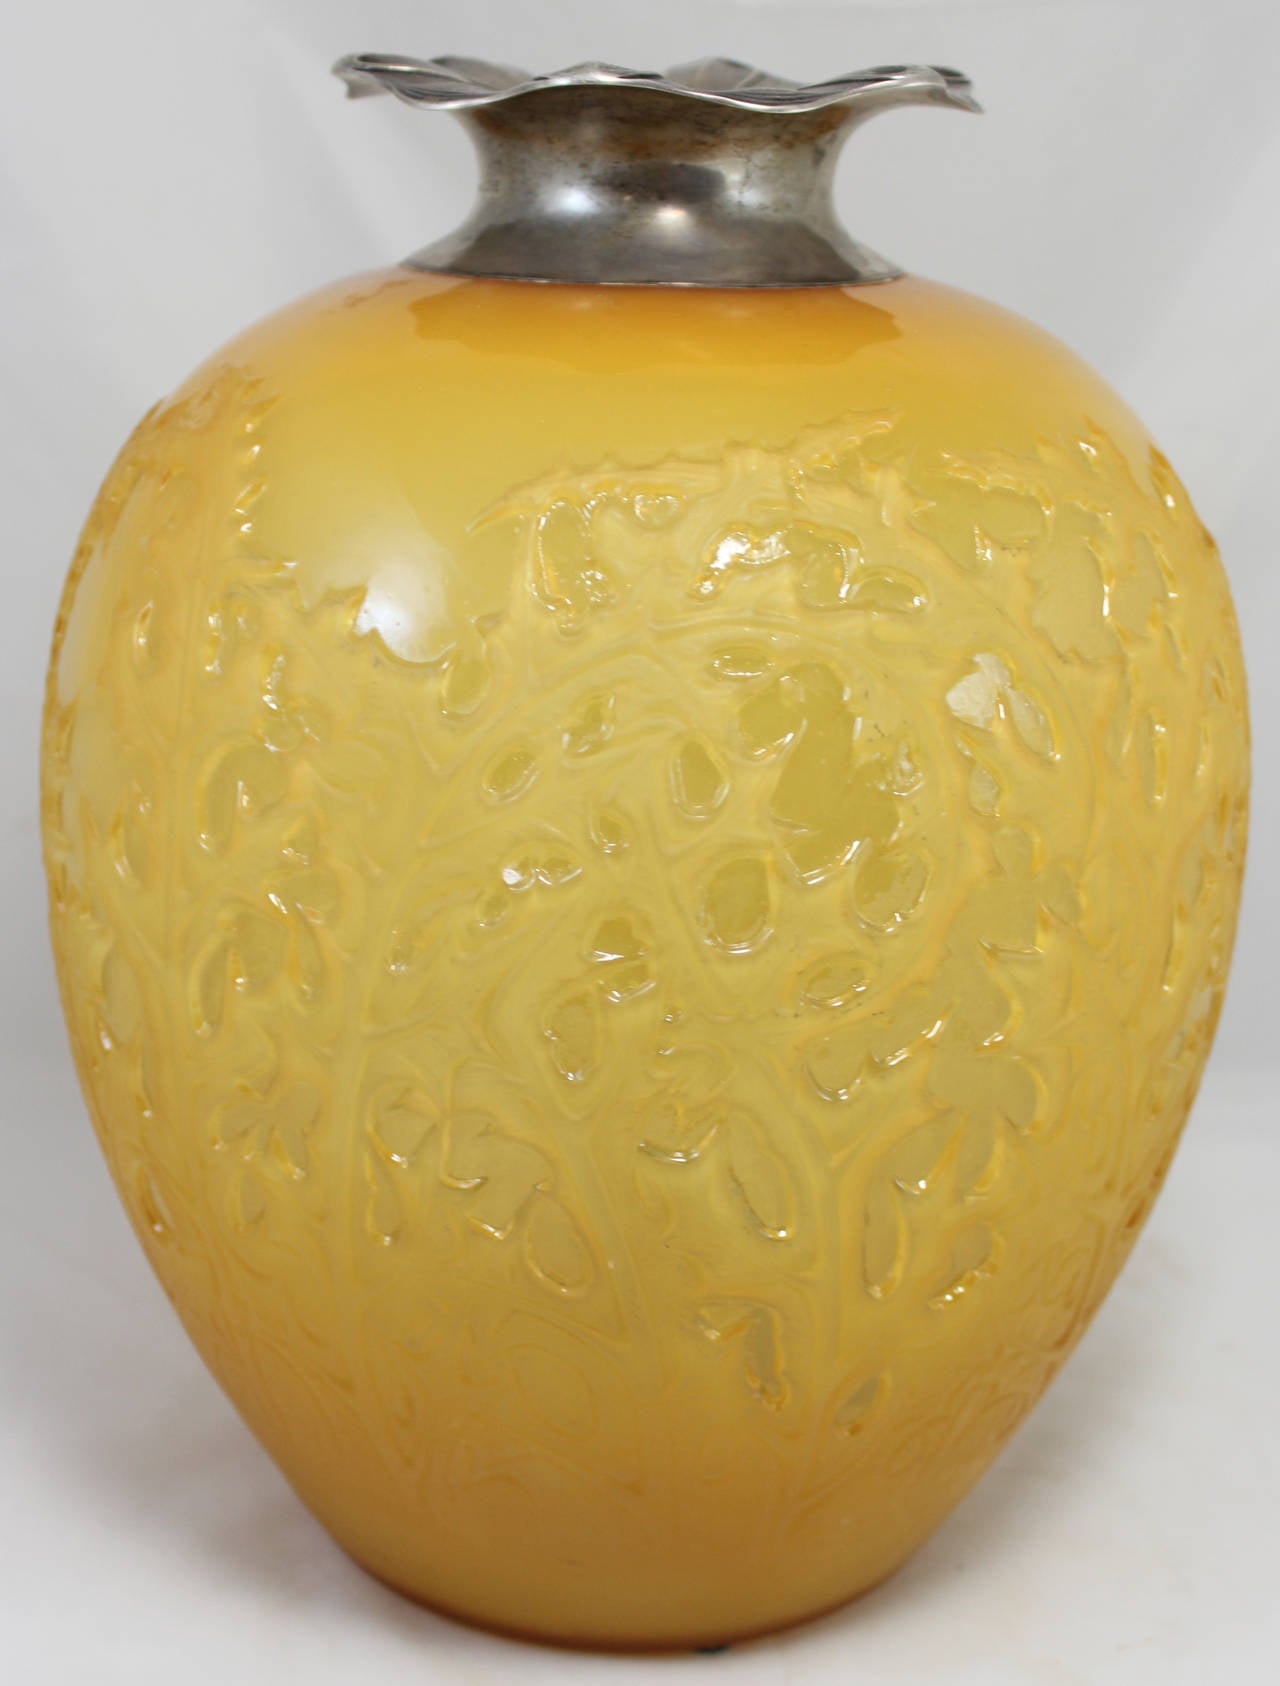 Art Nouveau Rene Lalique Glass Amber Vase in the Acanthus Pattern with Silver Mounted Top